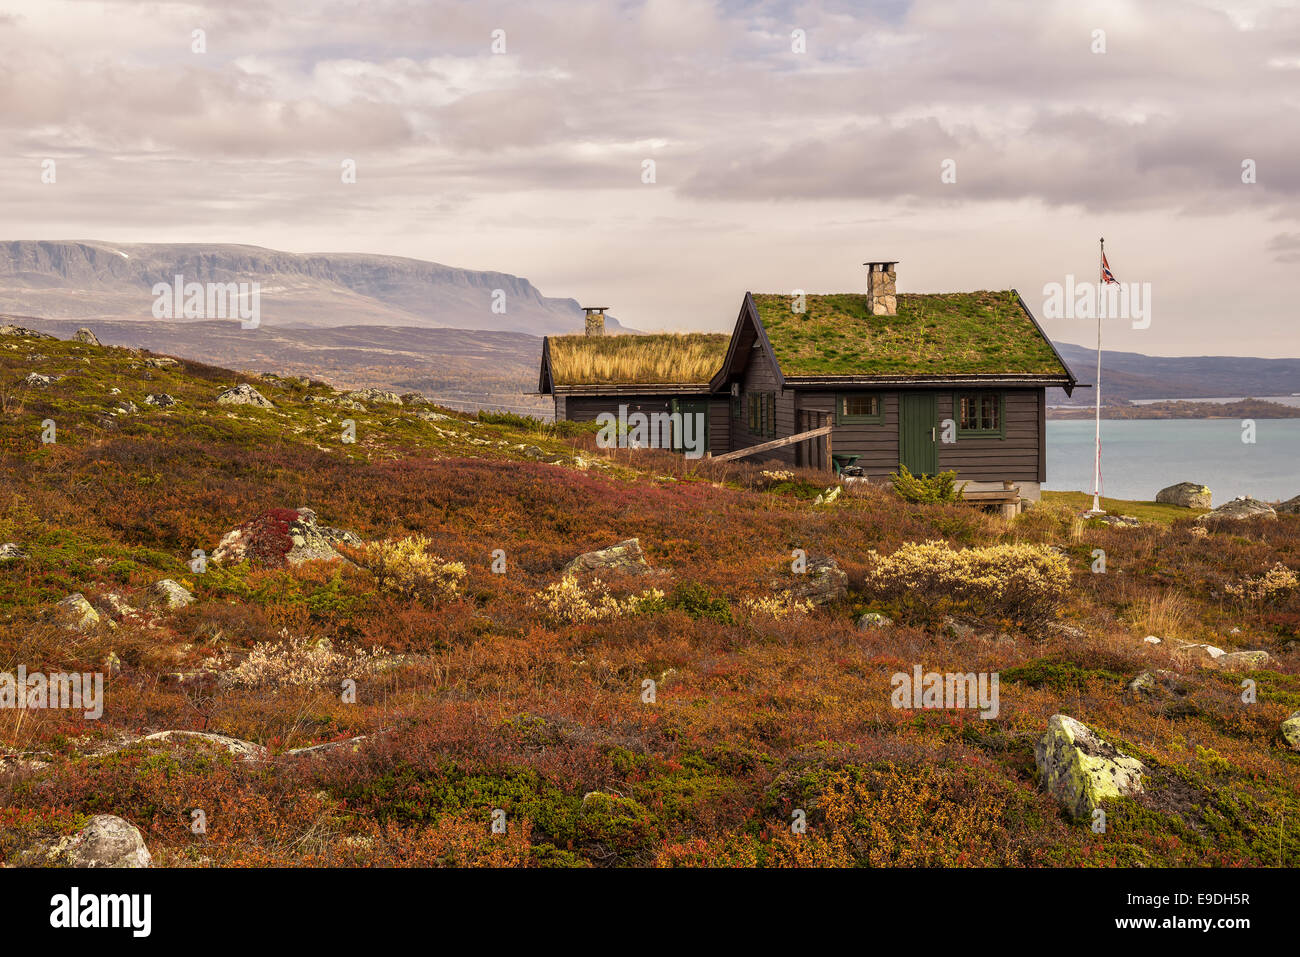 Cabin with turf roof near Hardangervidda National Park with Sloddfjorden lake in the background, Buskerud county, Norway Stock Photo